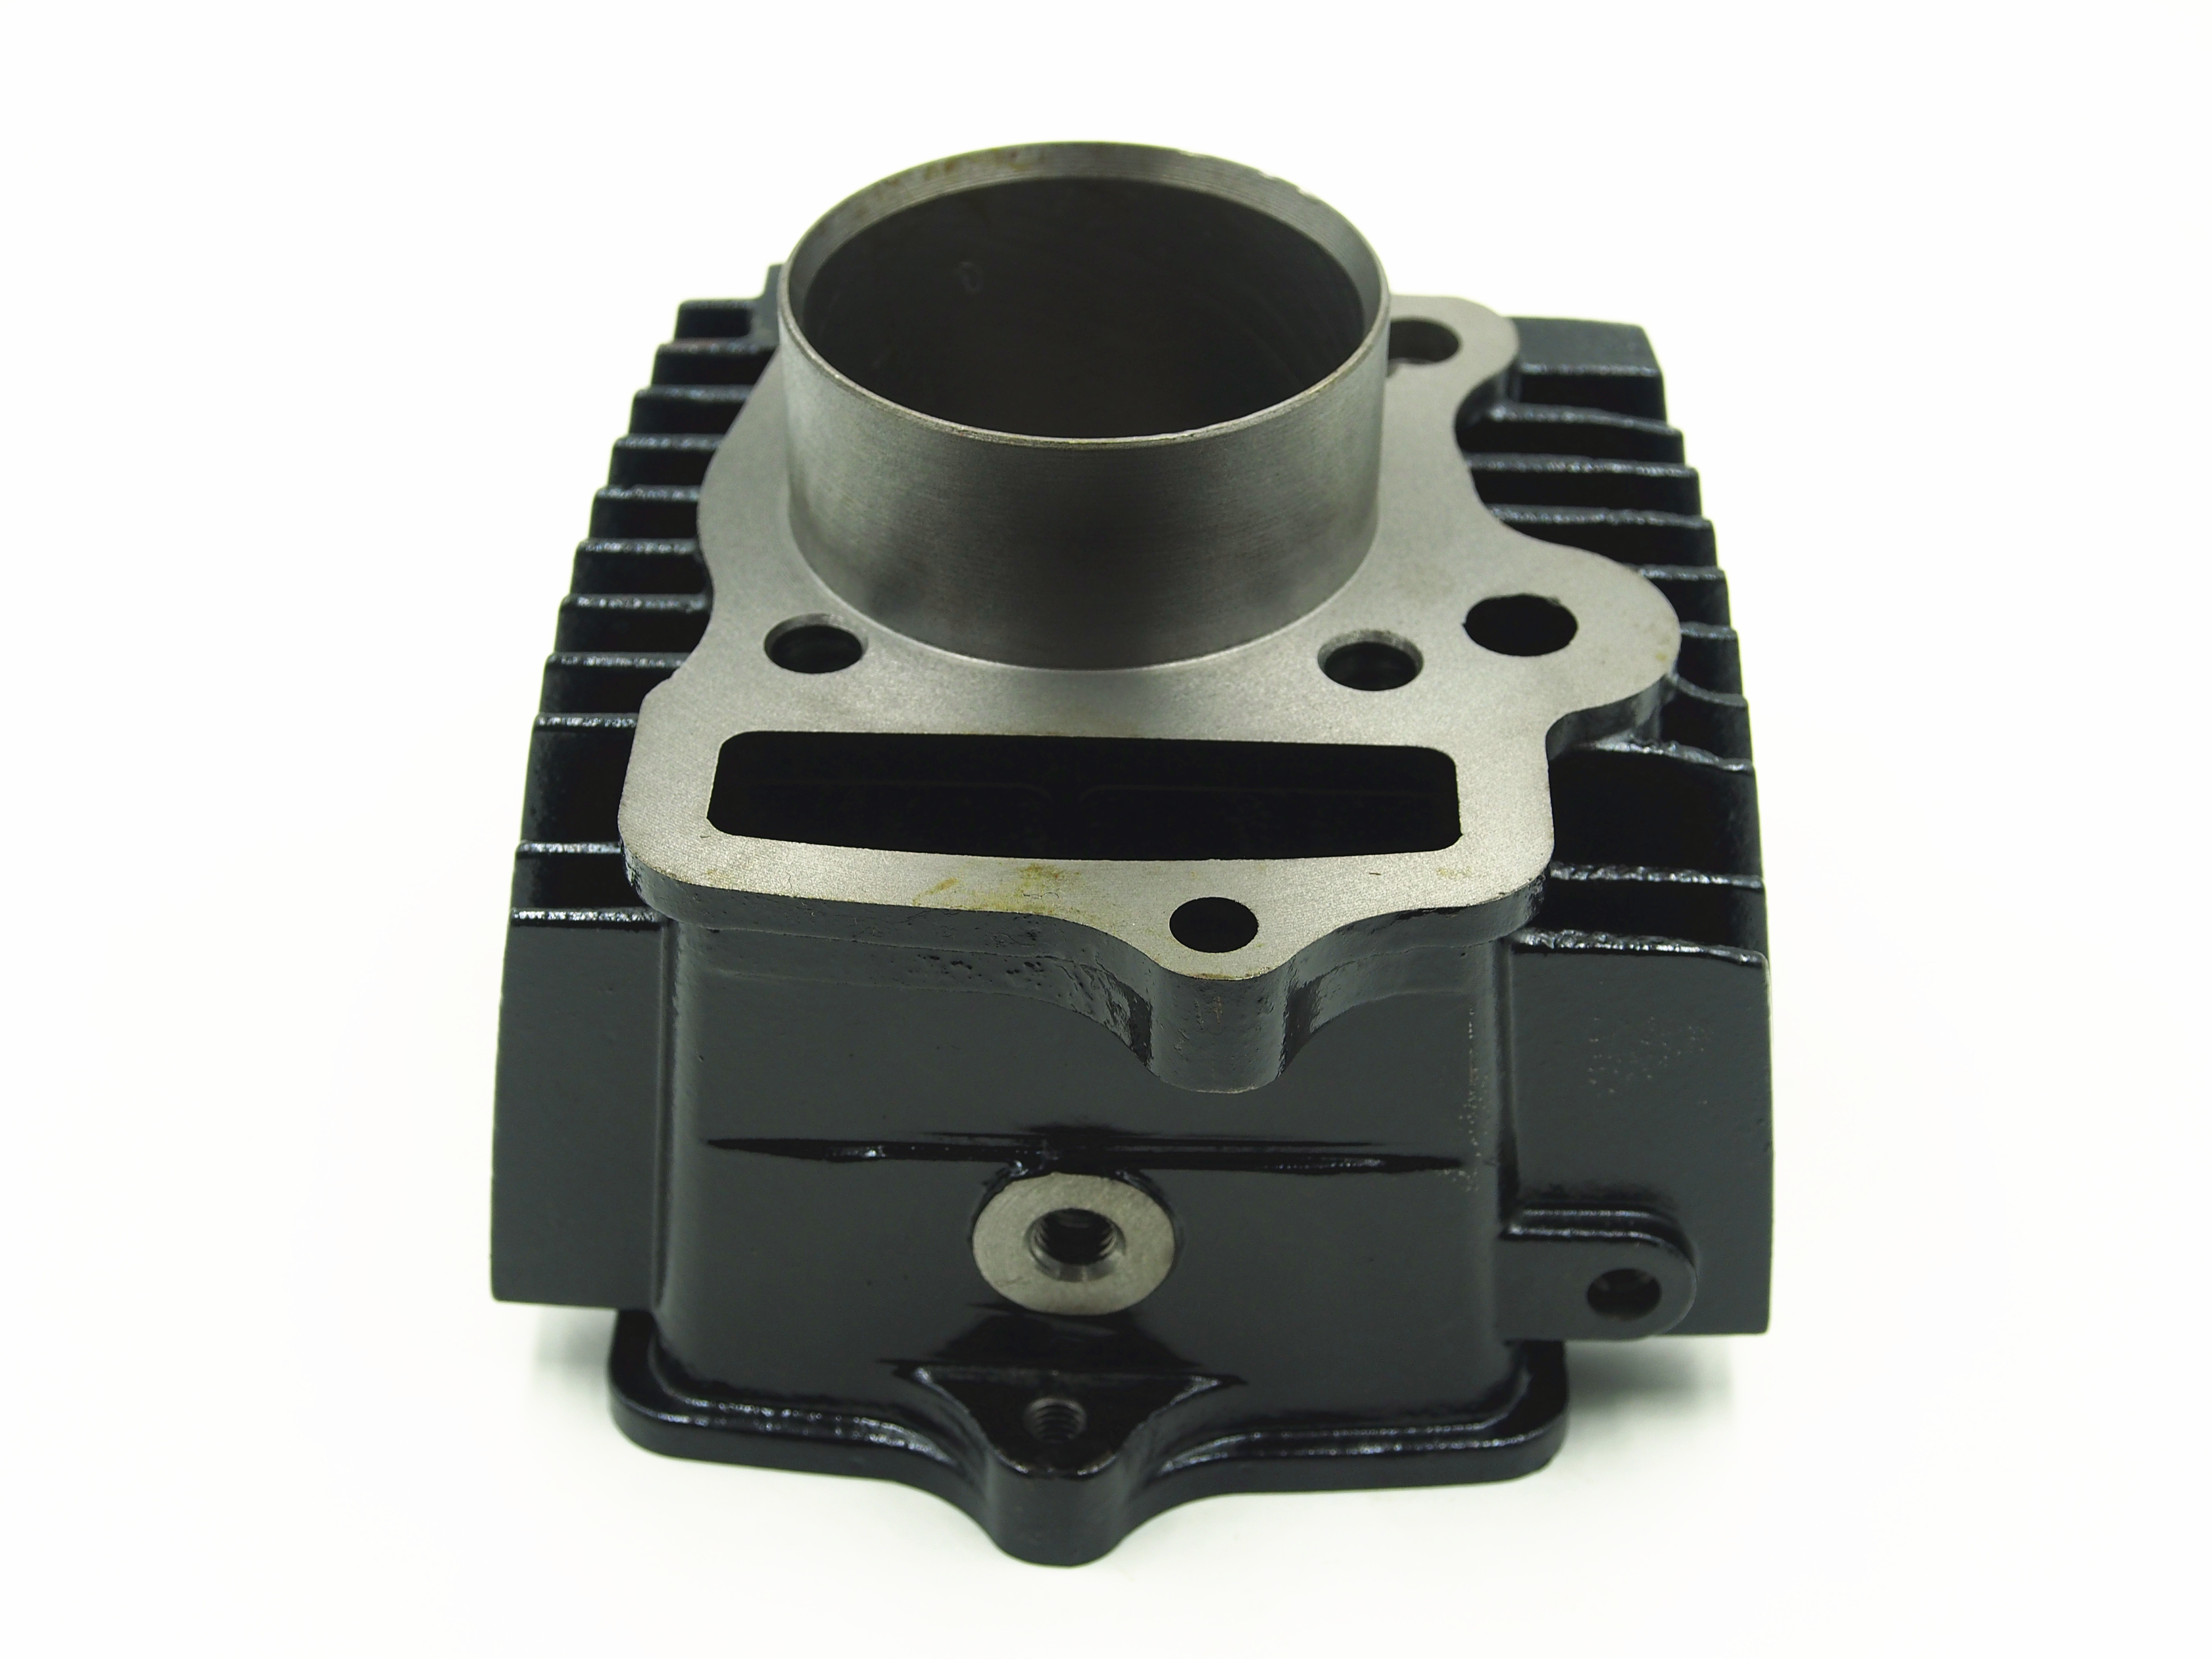 Black Oil Saving Motorcycle Cylinder Block C100 With Standard Carton Package